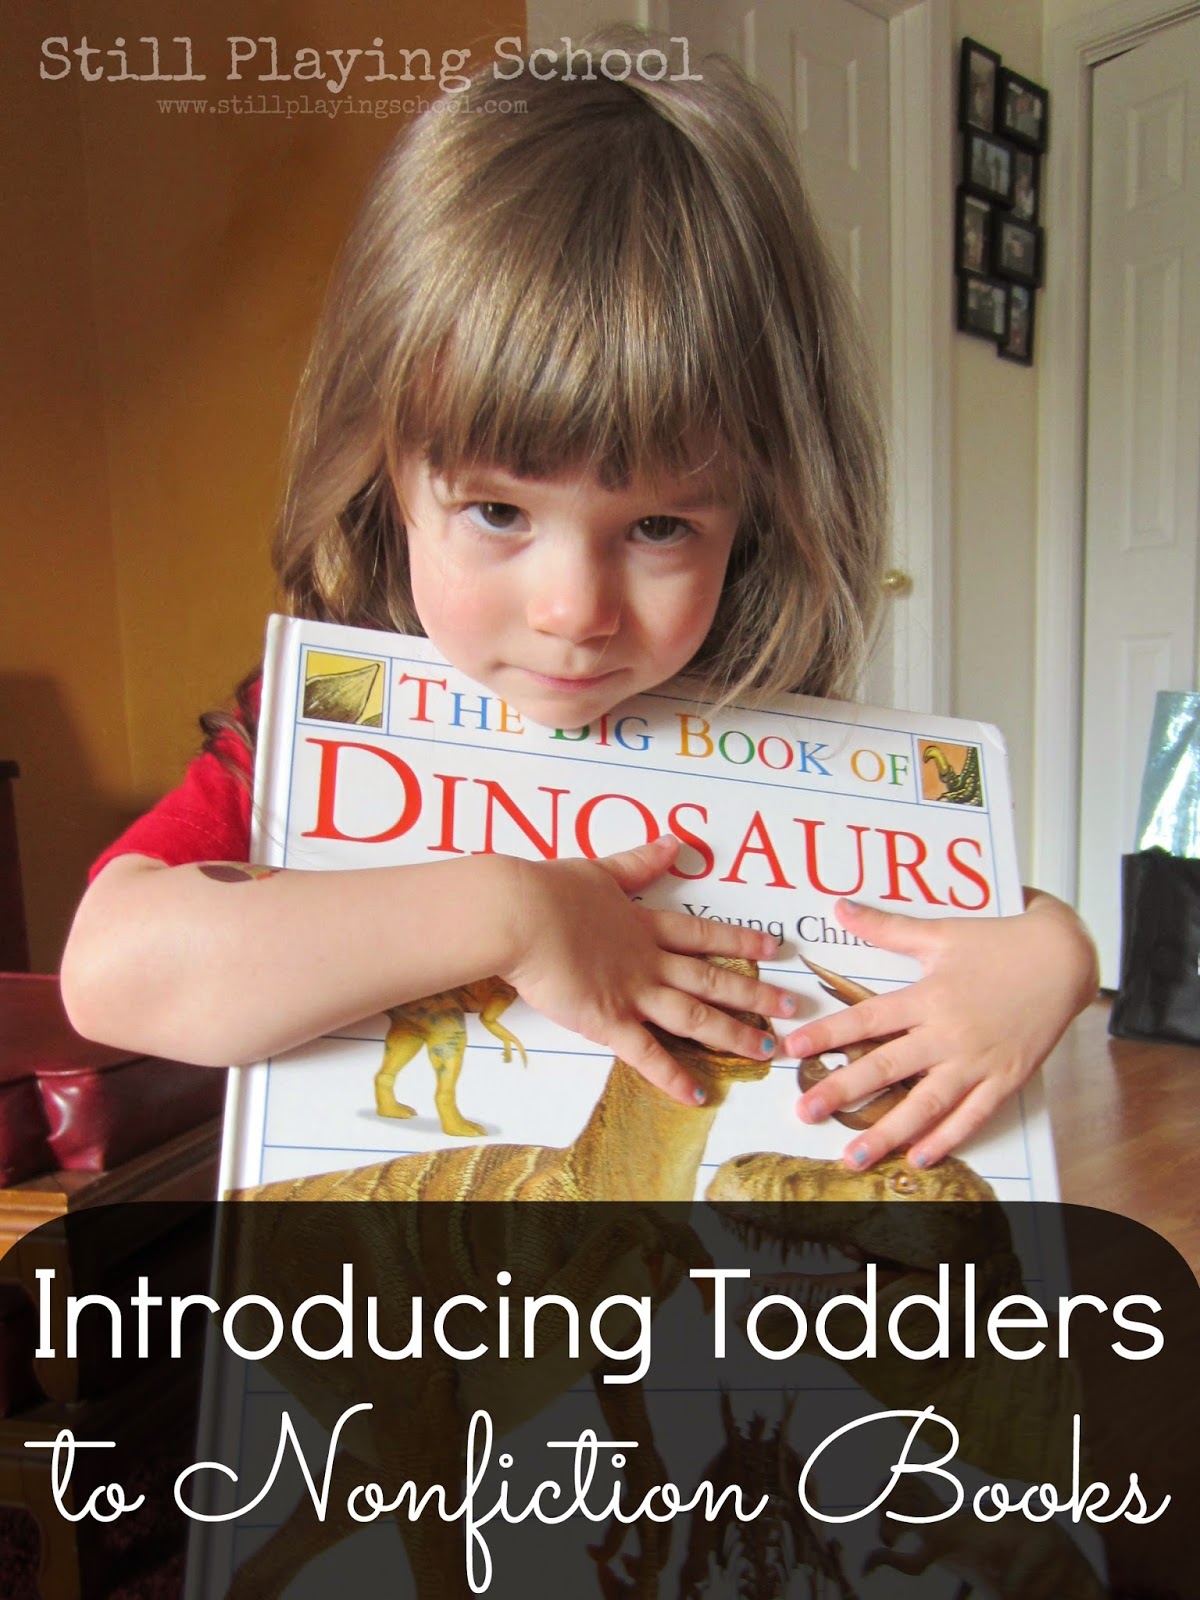 Introducing Nonfiction Books to Toddlers | Still Playing School